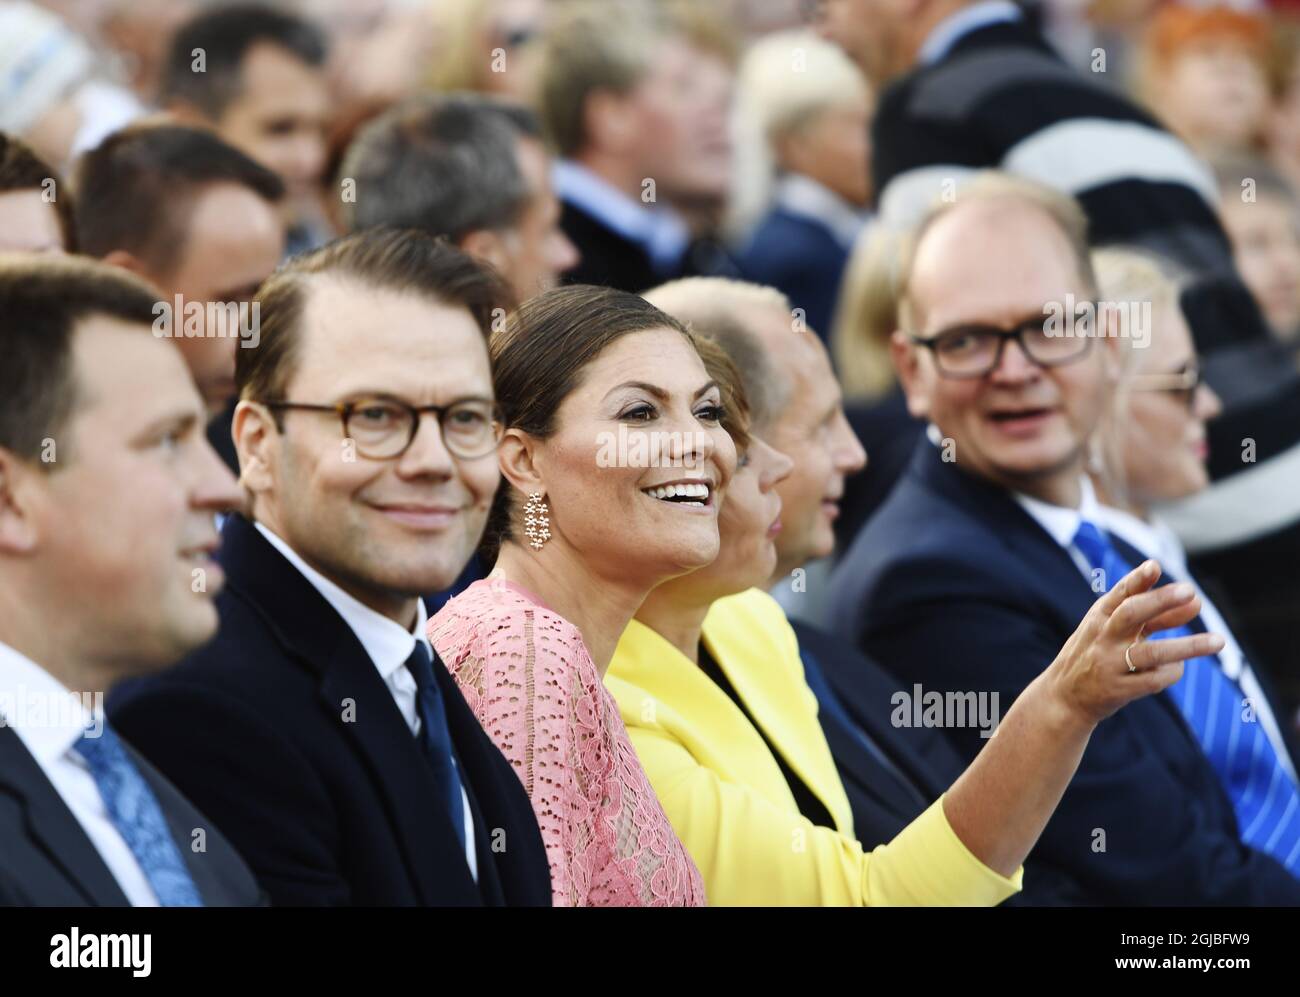 TALLINN 20180819 Prince Daniel and Crown Princess Victoria attending the music festival 'Estonian Joint Singing Song Power' during their visit to Estonia on Sunday 19, 2018. Photo: Henrik Montgomery / TT code 10060  Stock Photo